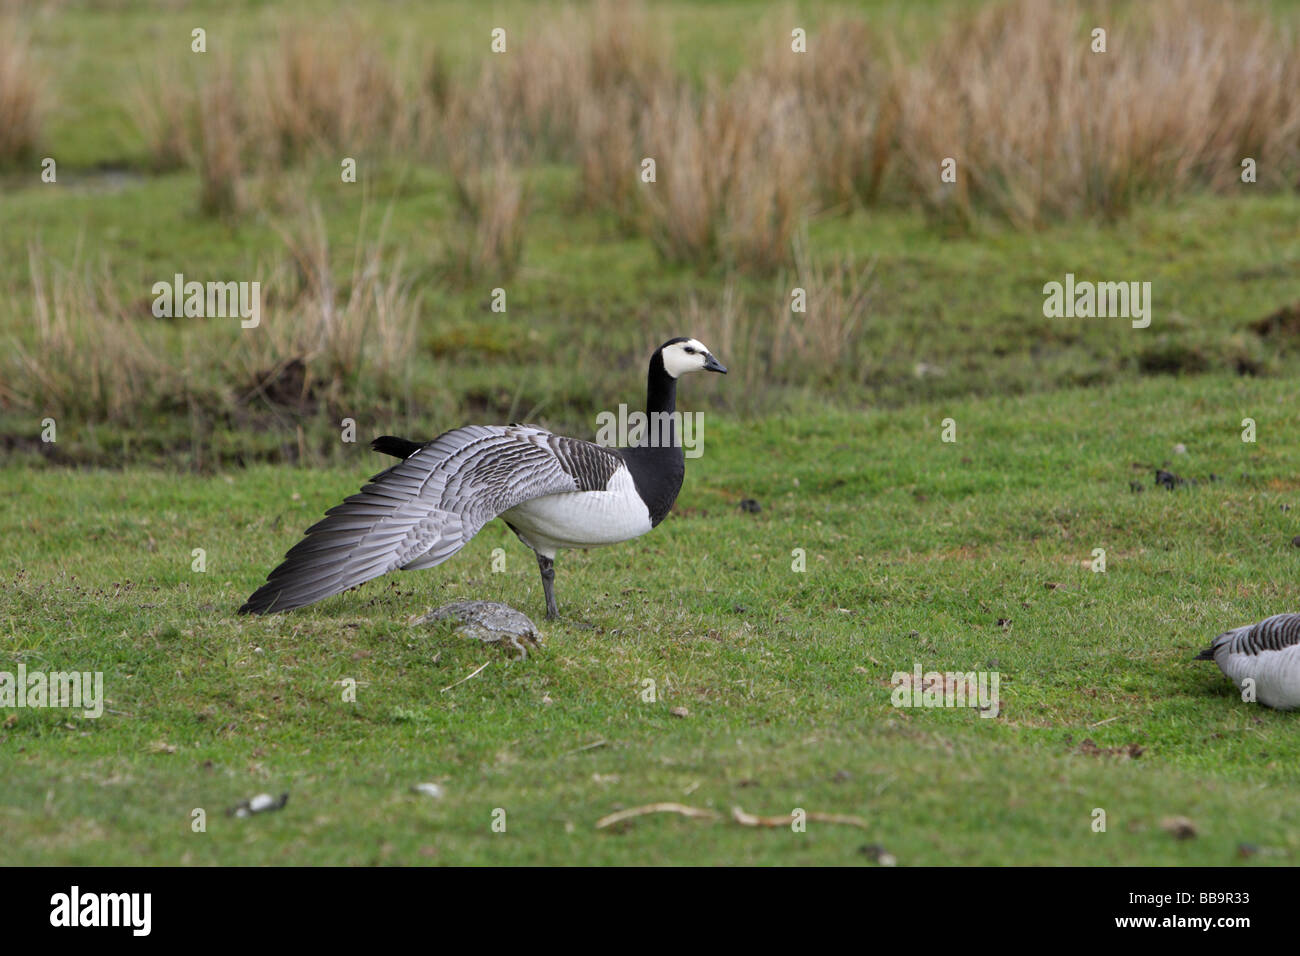 Bean Goose Anser fabalis stretching its wing standing in a field in Scotland Stock Photo